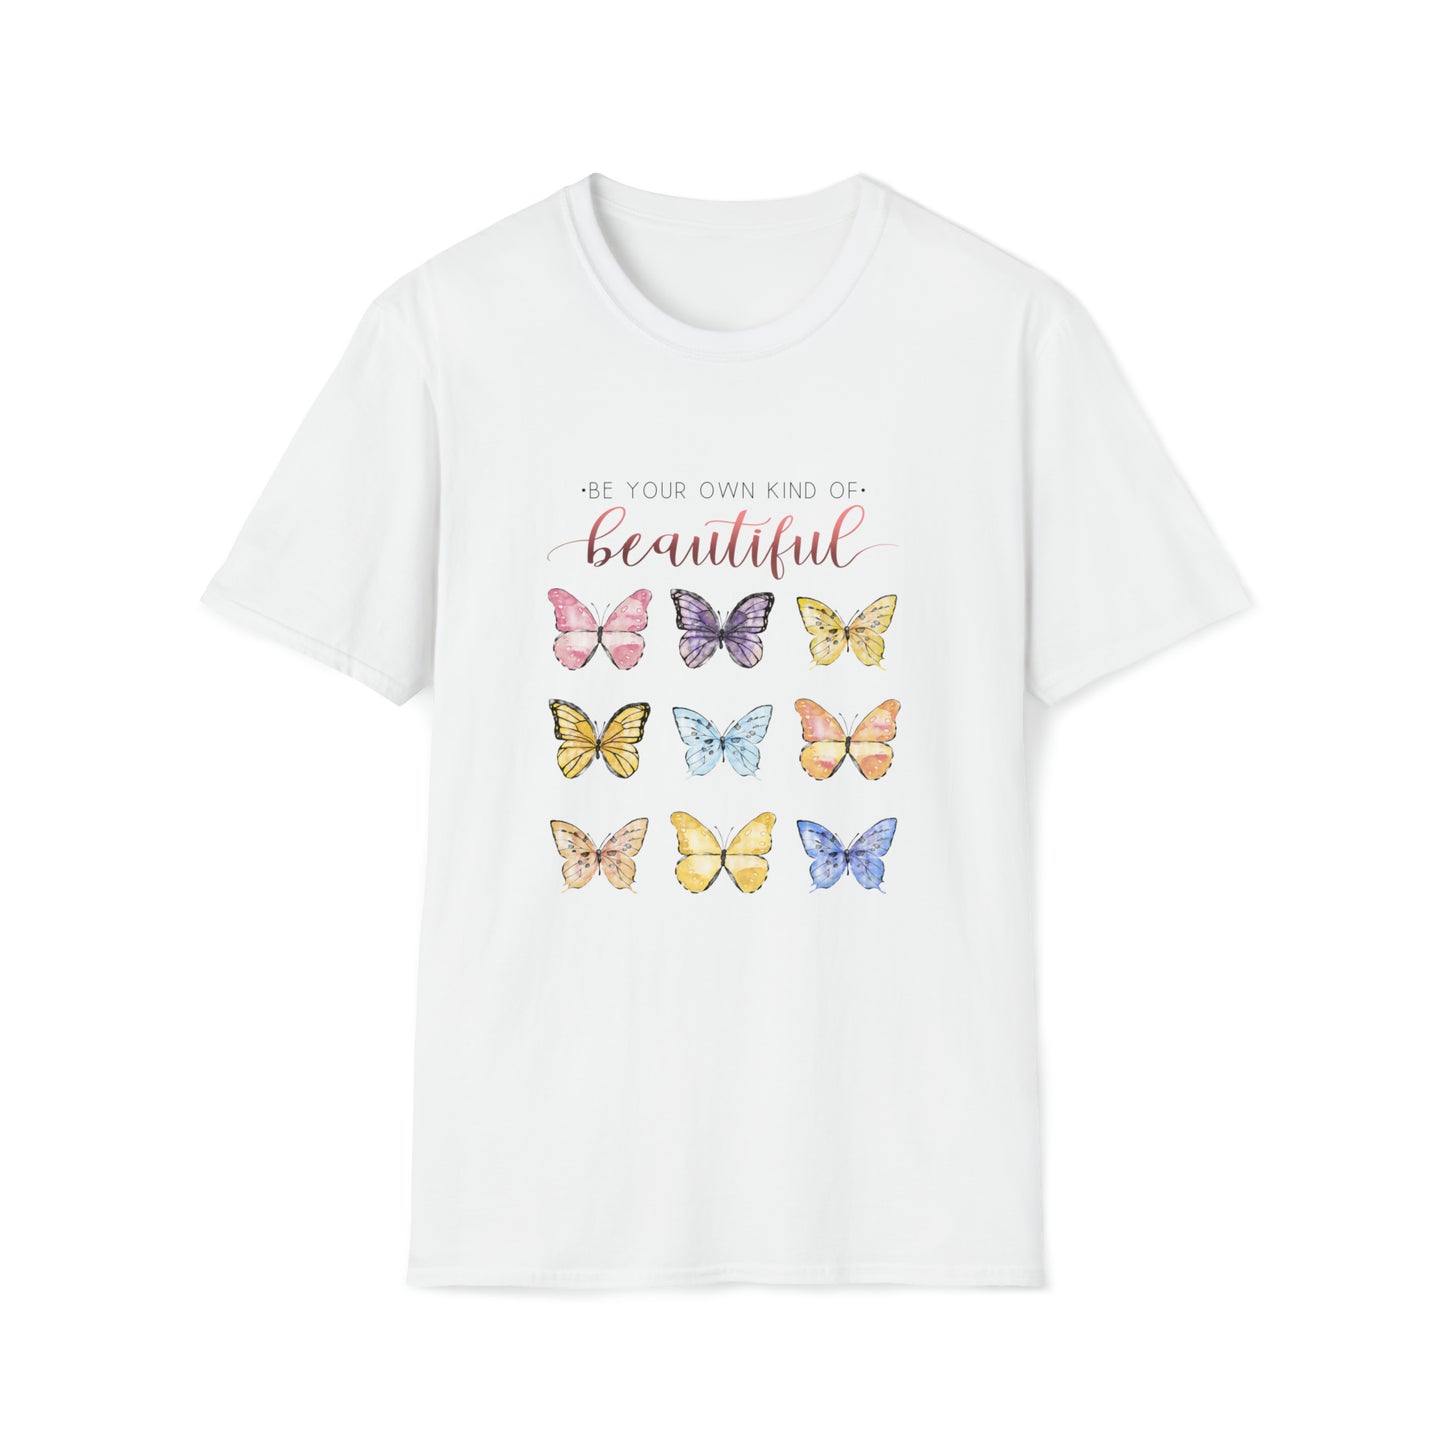 Softstyle T-Shirt, Be Your Own Kind of Beautiful, Butterflies